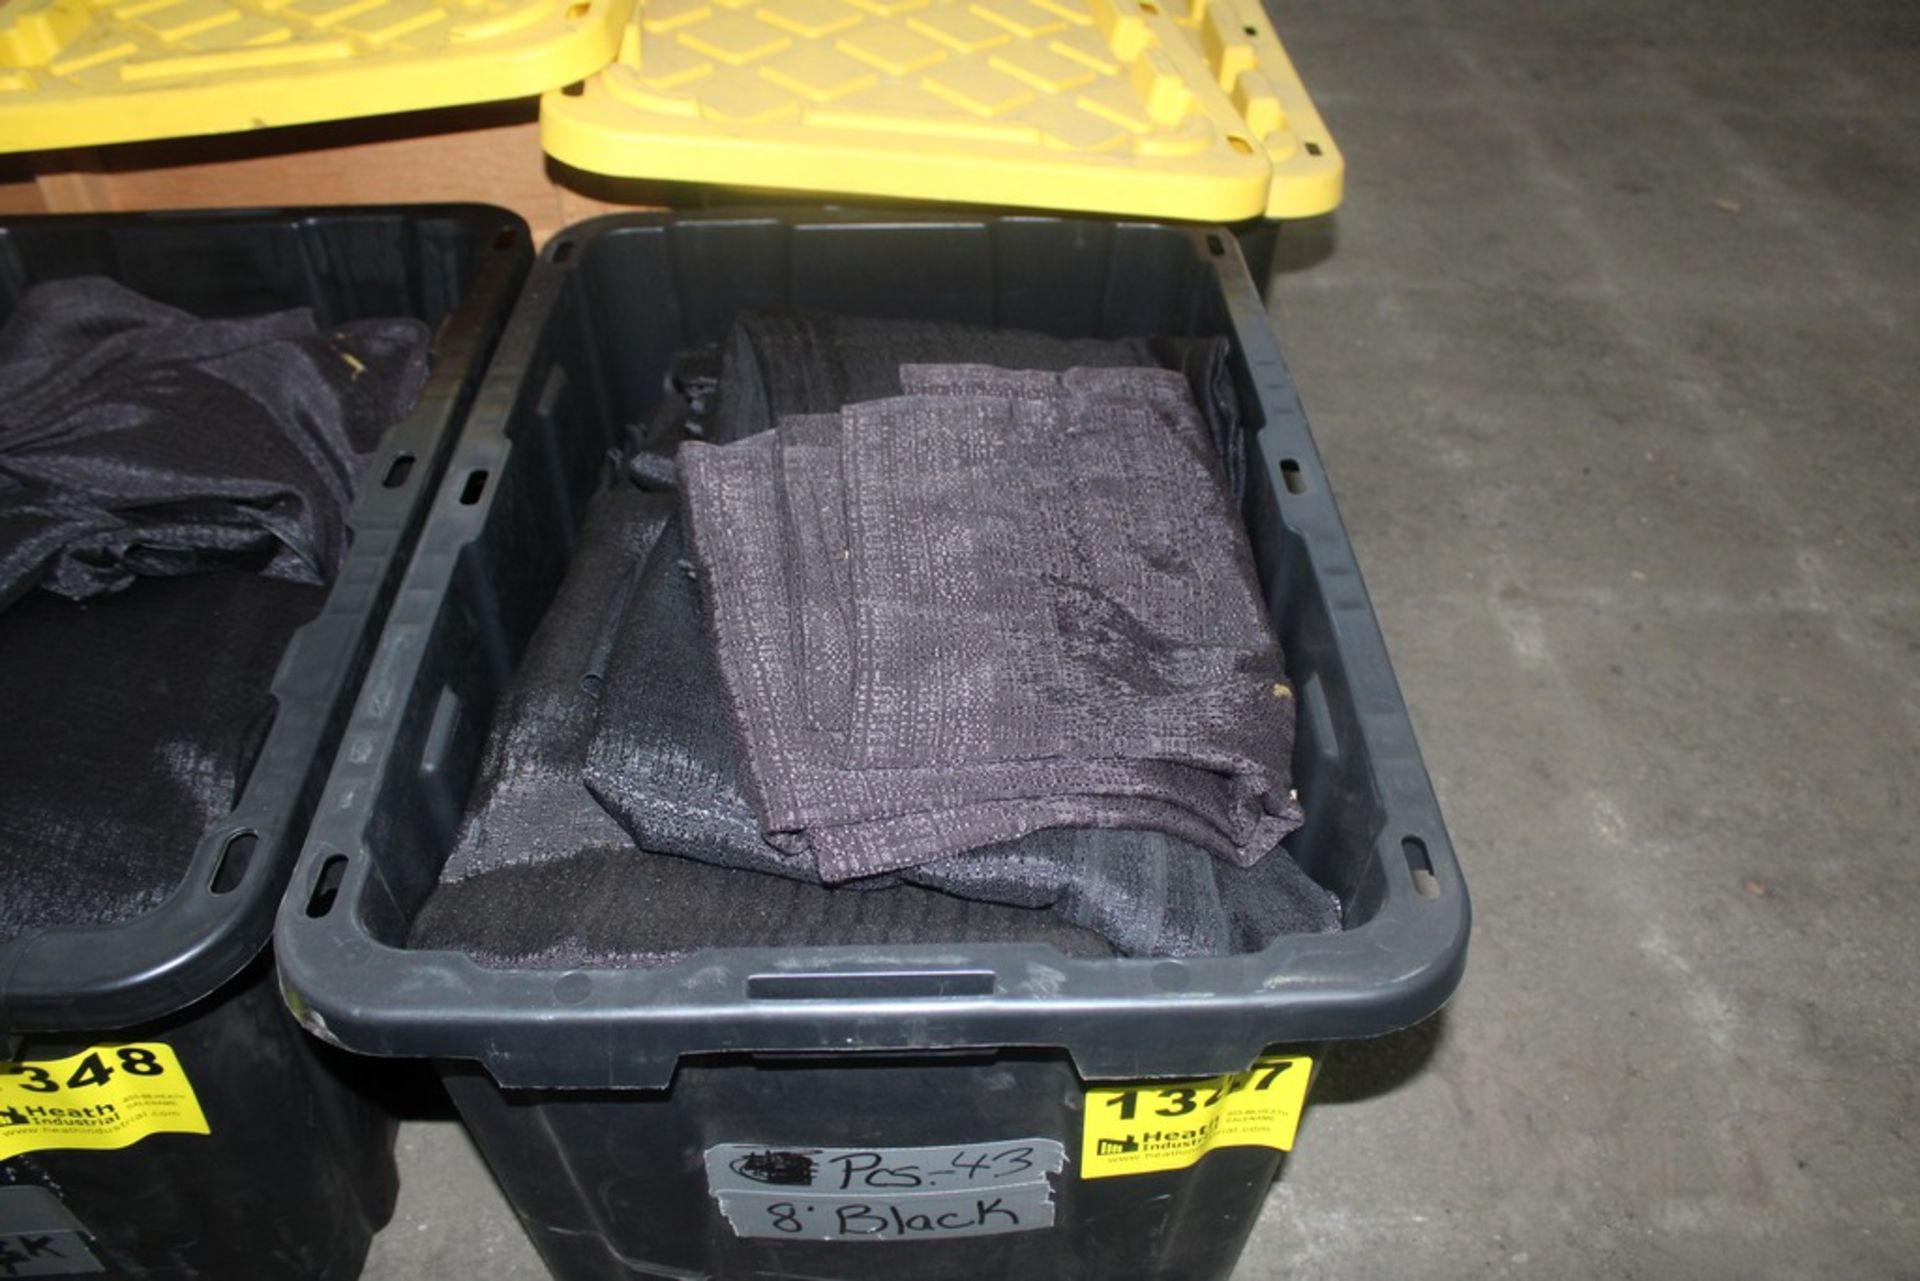 APPROX. (43) 8FT BLACK DRAPES IN TOTE ( QUANTITES NOT GUARANTEED)